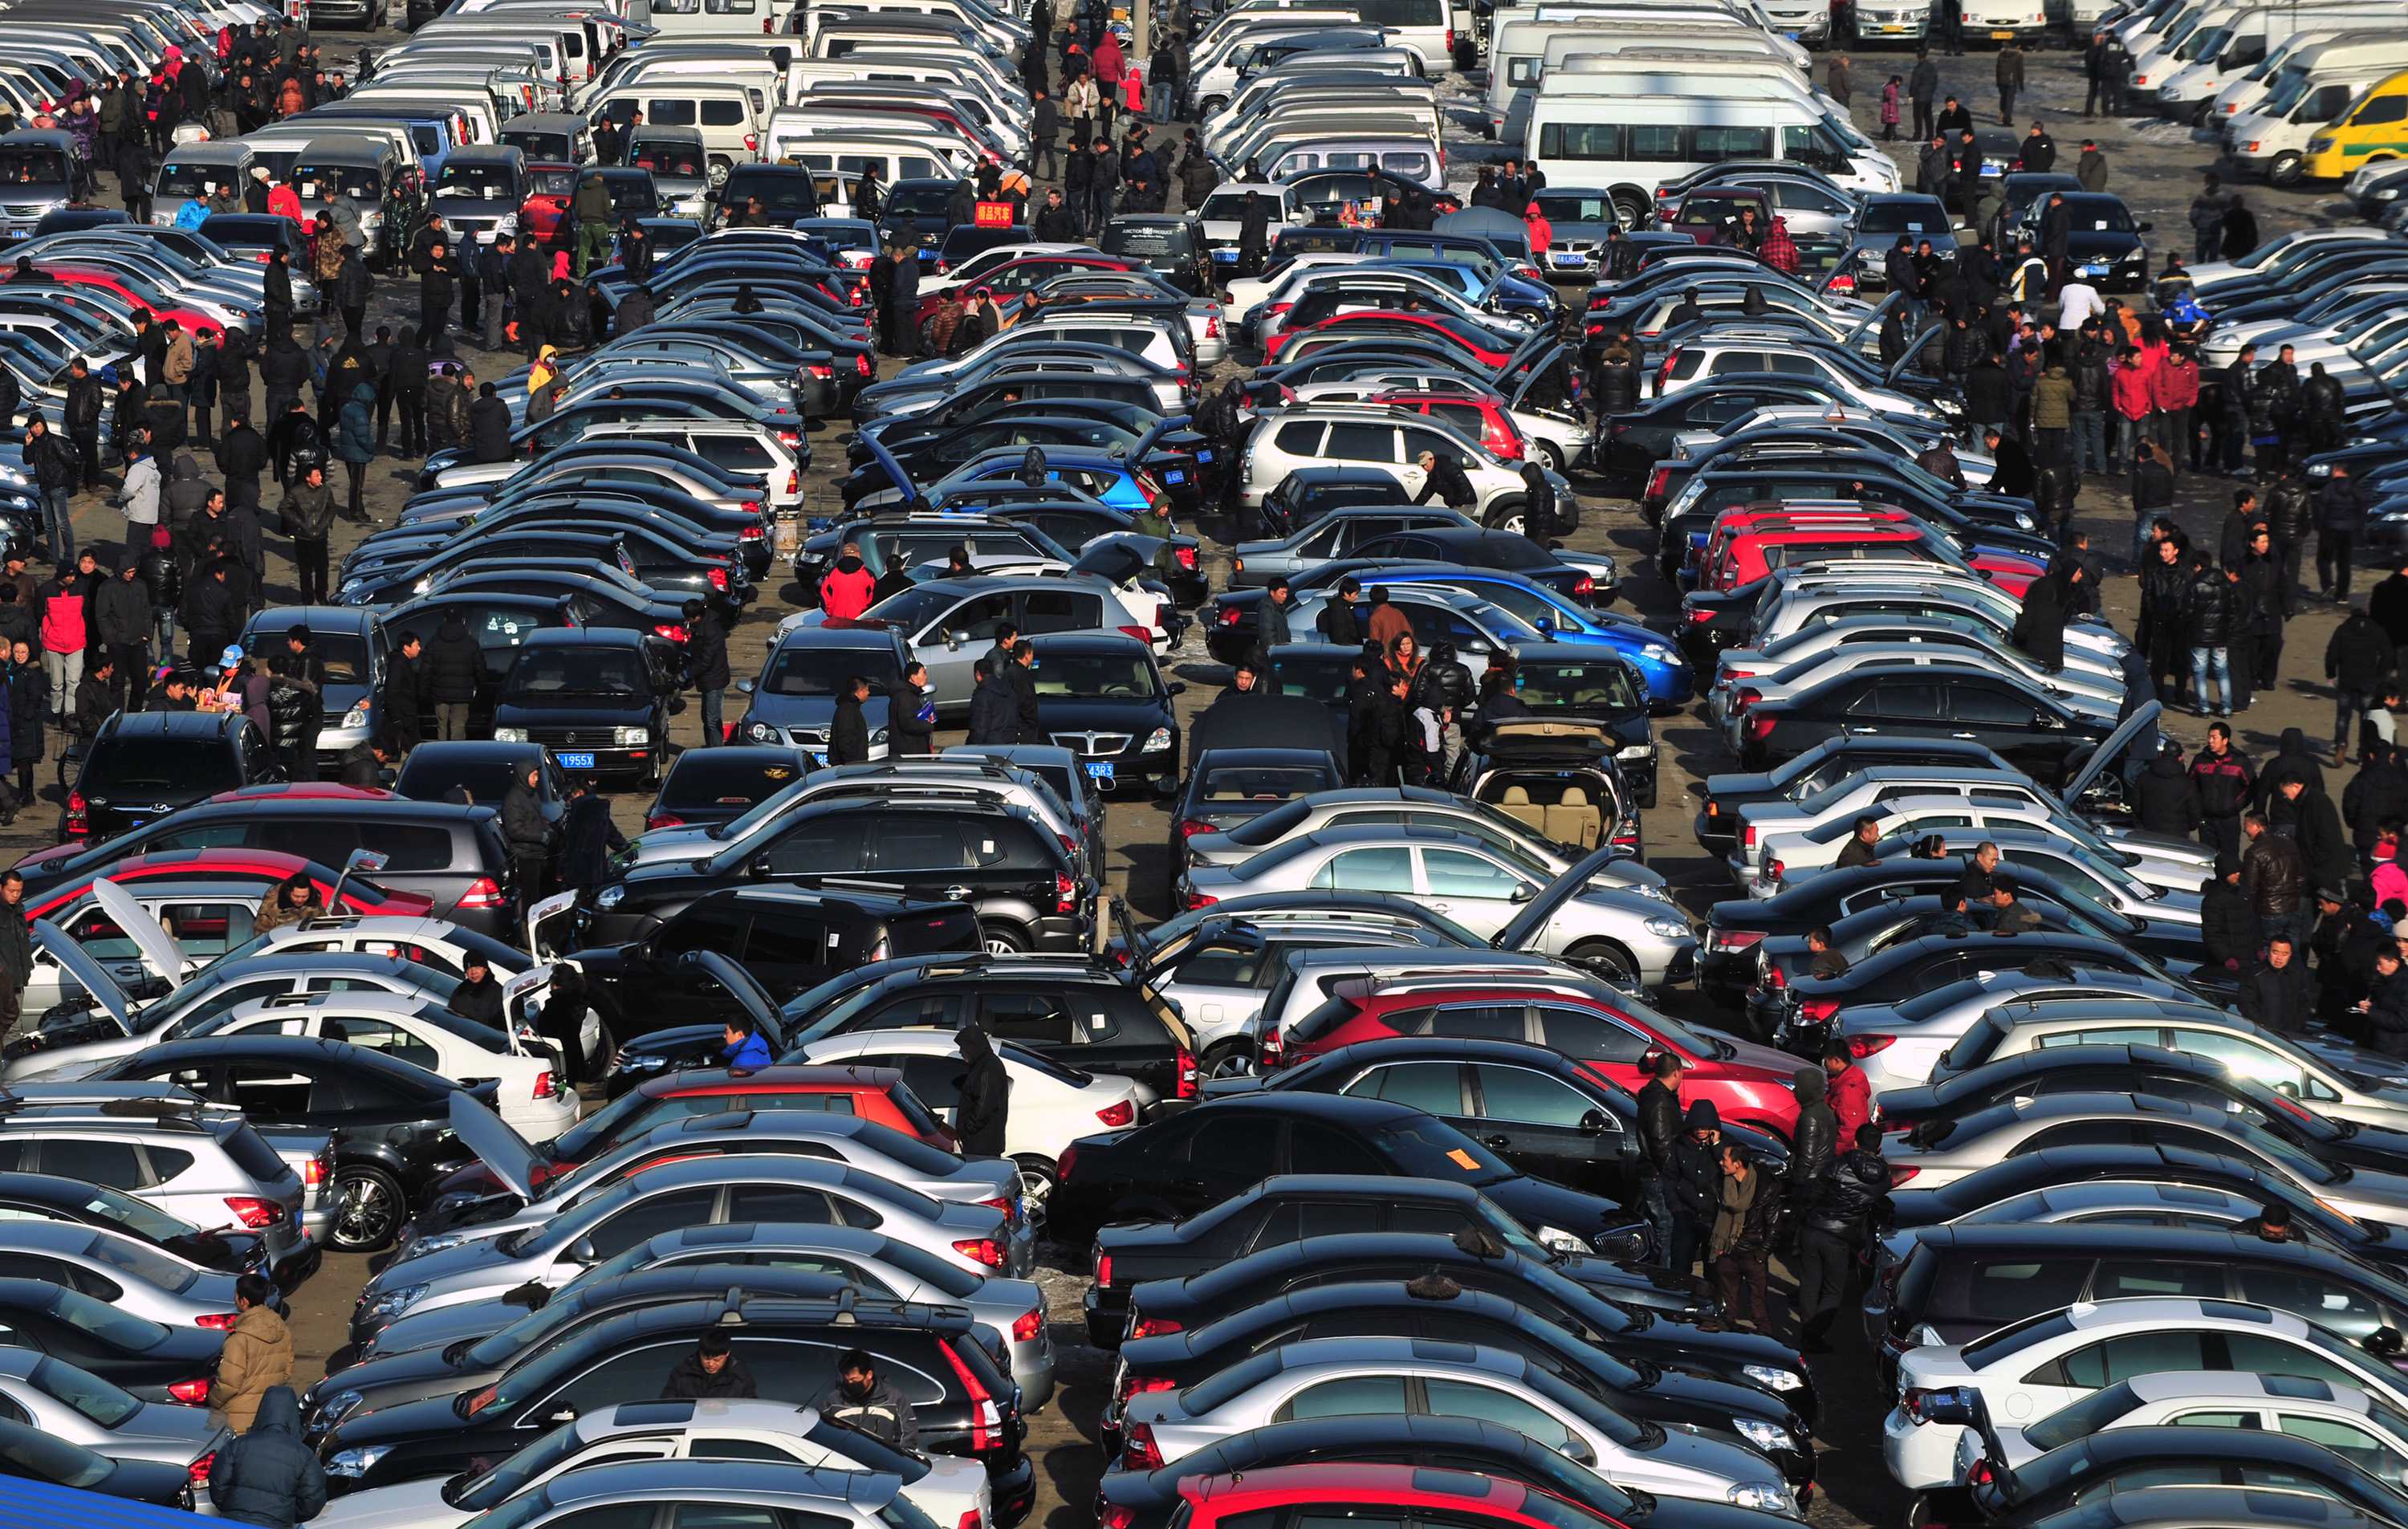 China Car : China Car Sales Up 26% in July | Financial Tribune - Well